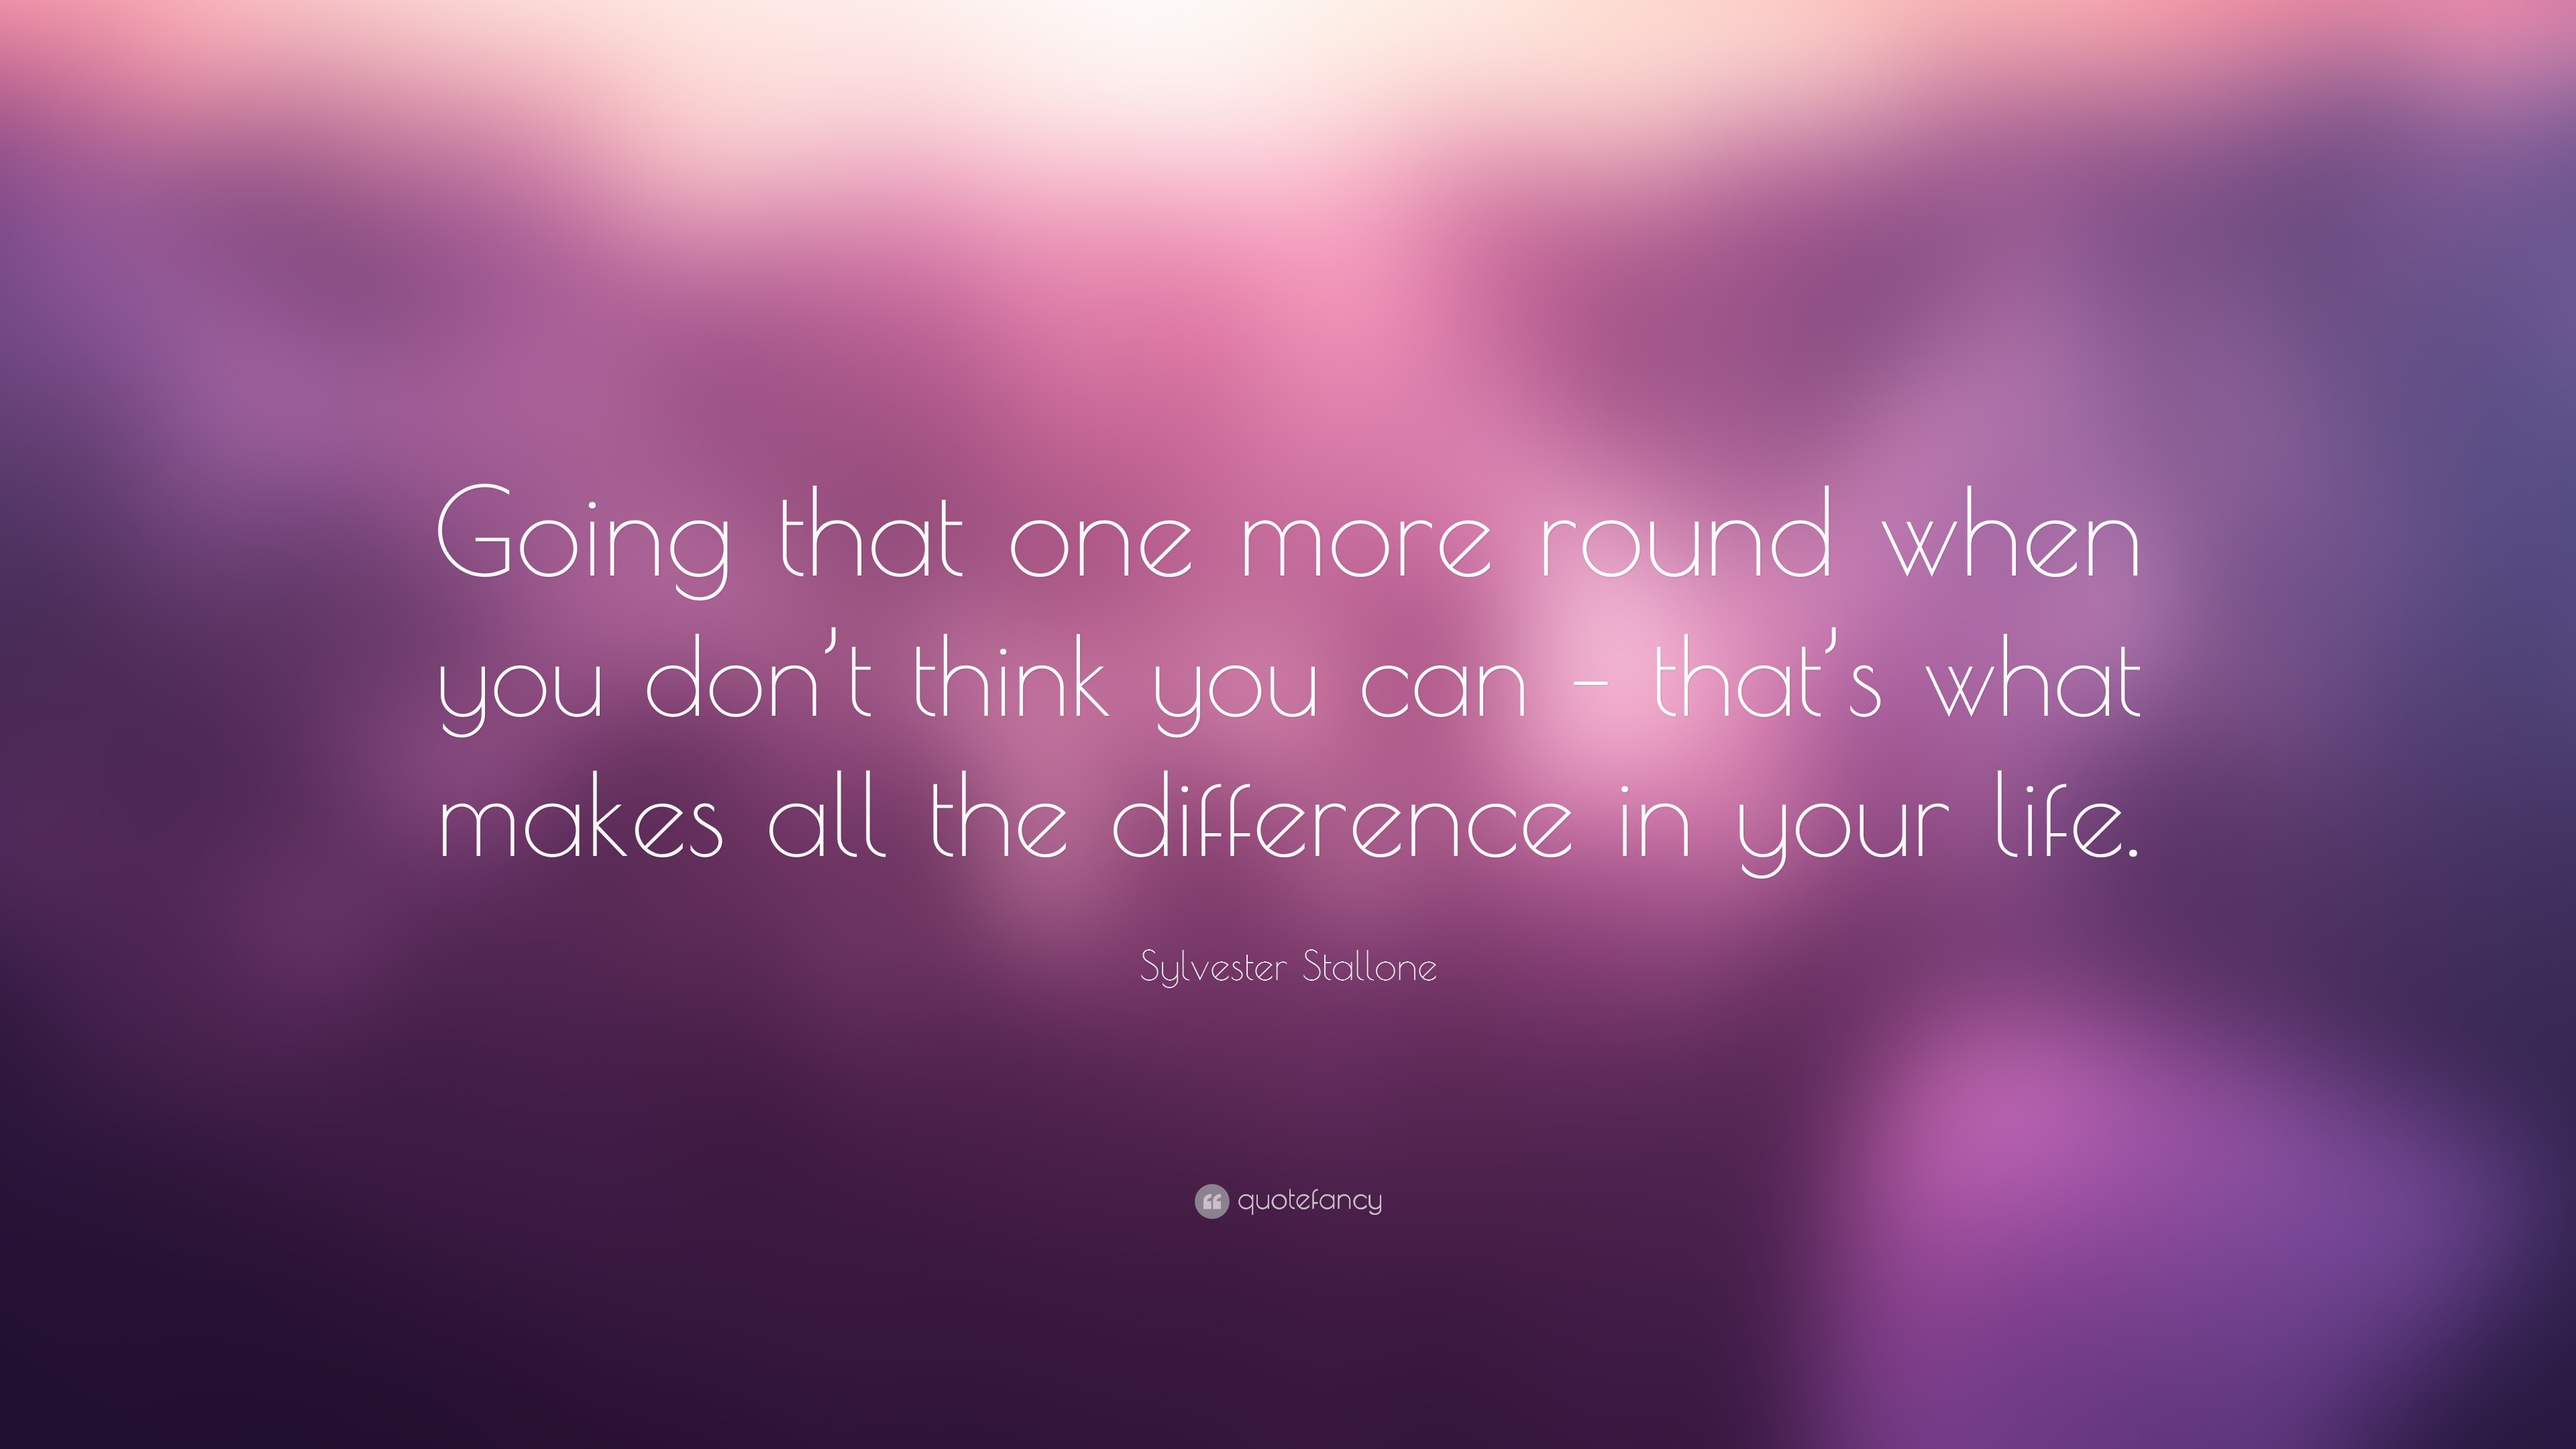 Sylvester Stallone Quote: “Going that one more round when you don’t ...